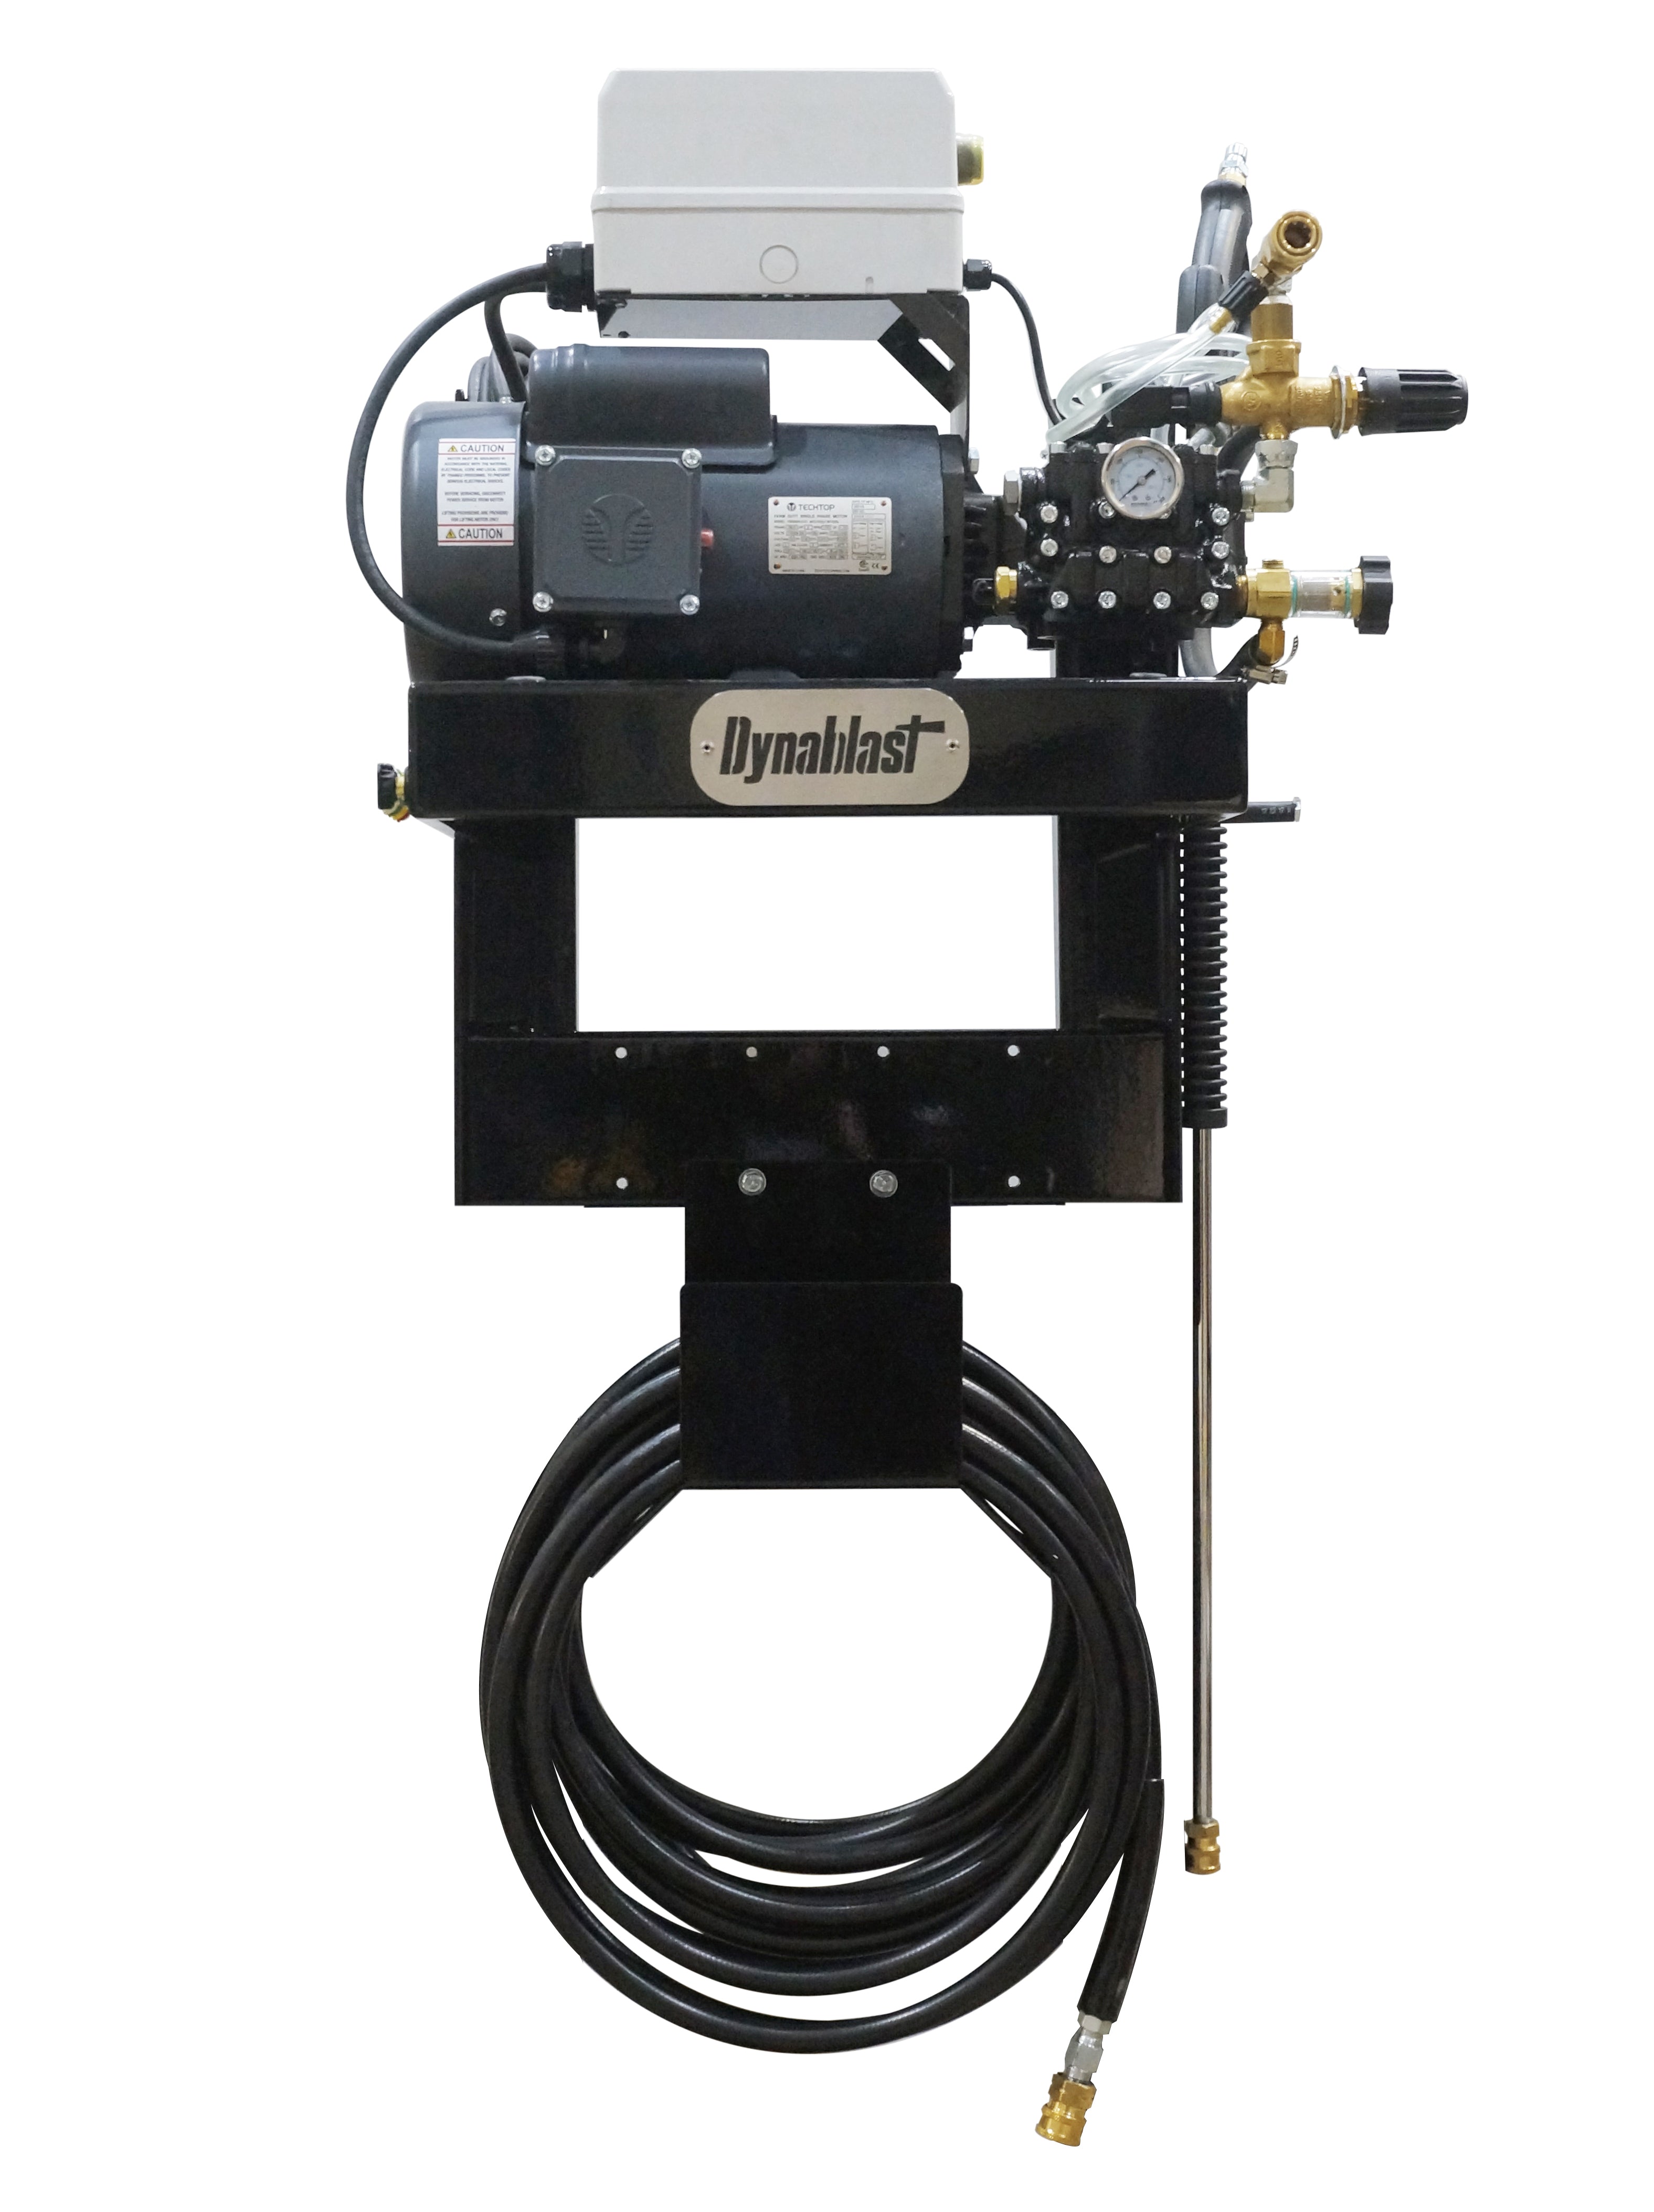 Cold Water Commercial Grade Electric Pressure Washer with Wall Mount - 1000 PSI @ 2.1 GPM